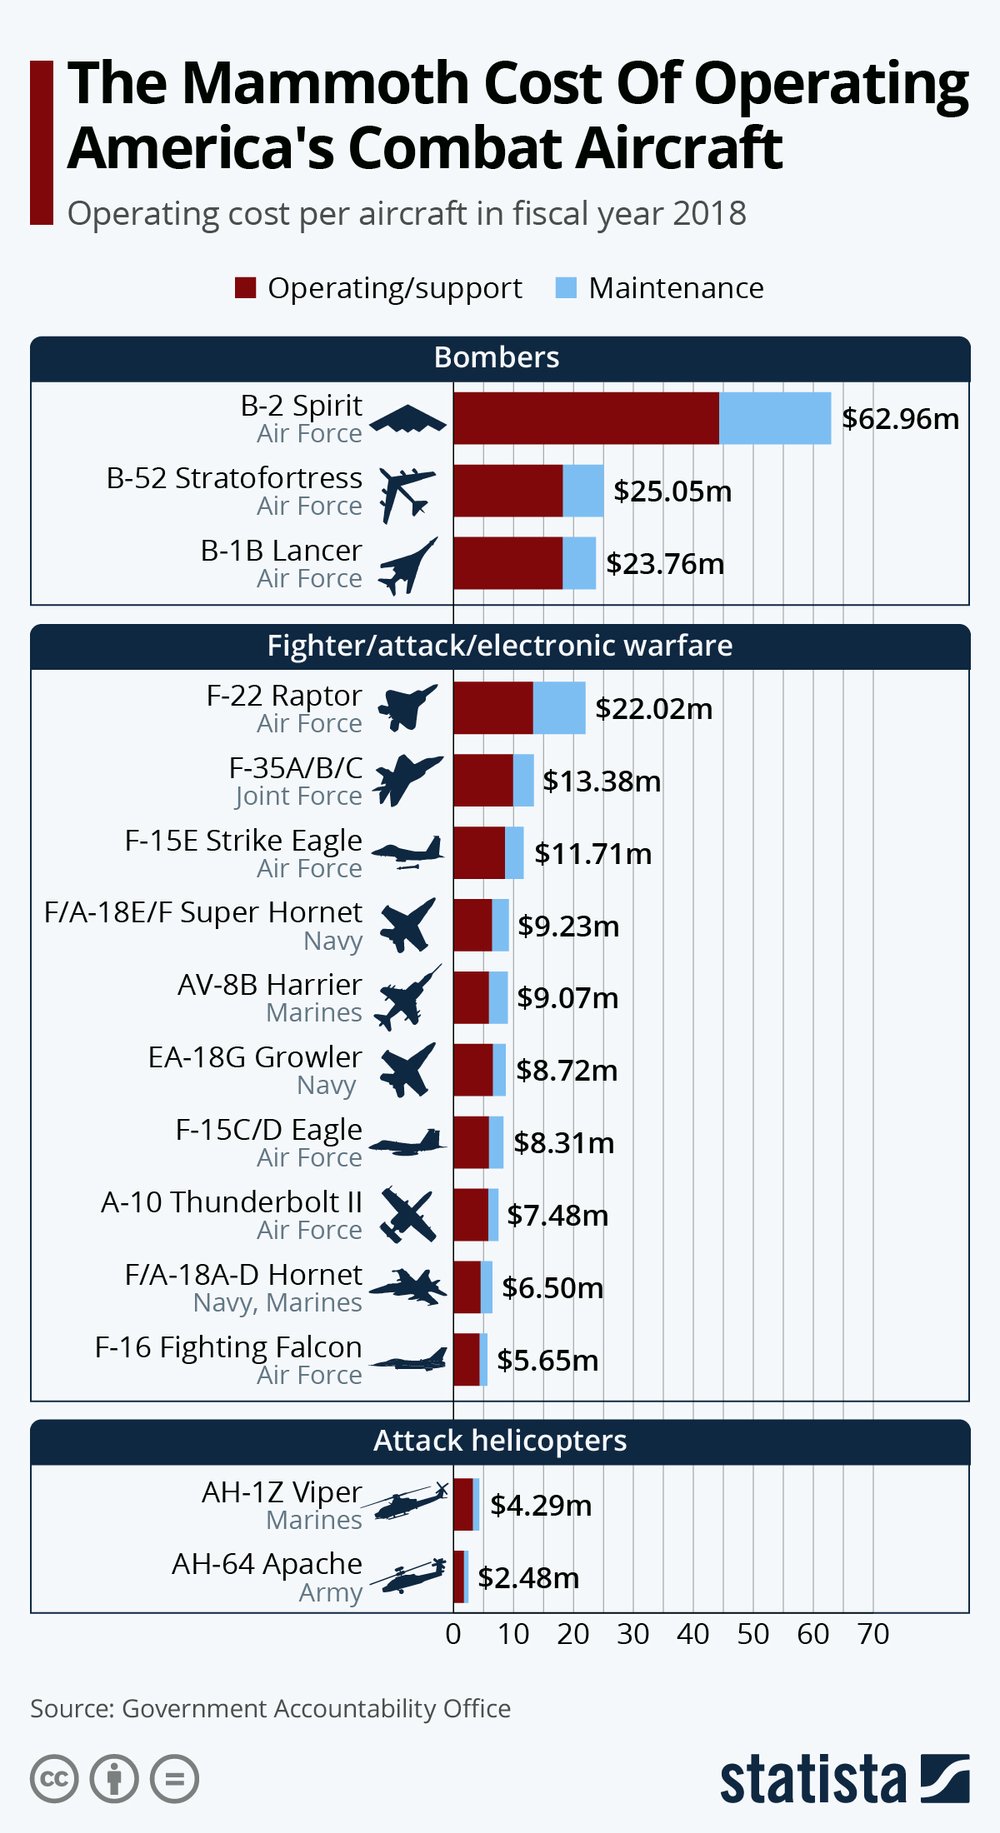 The Mammoth Cost of Operating America’s Combat Aircraft